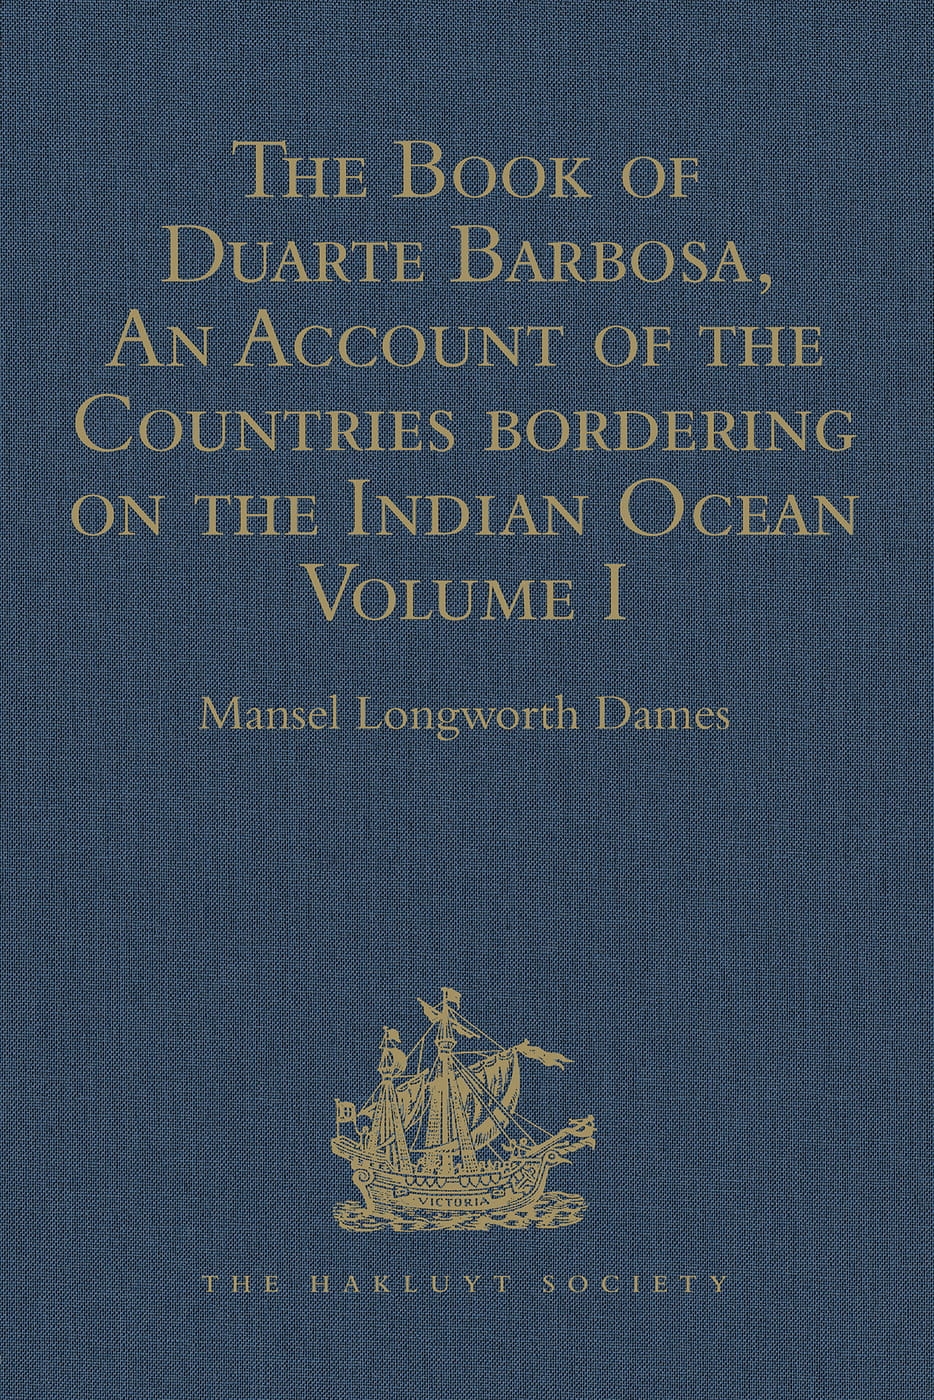 The Book of Duarte Barbosa, an Account of the Countries Bordering on the Indian Ocean and Their Inhabitants: Written by Duarte Barbosa, and Completed